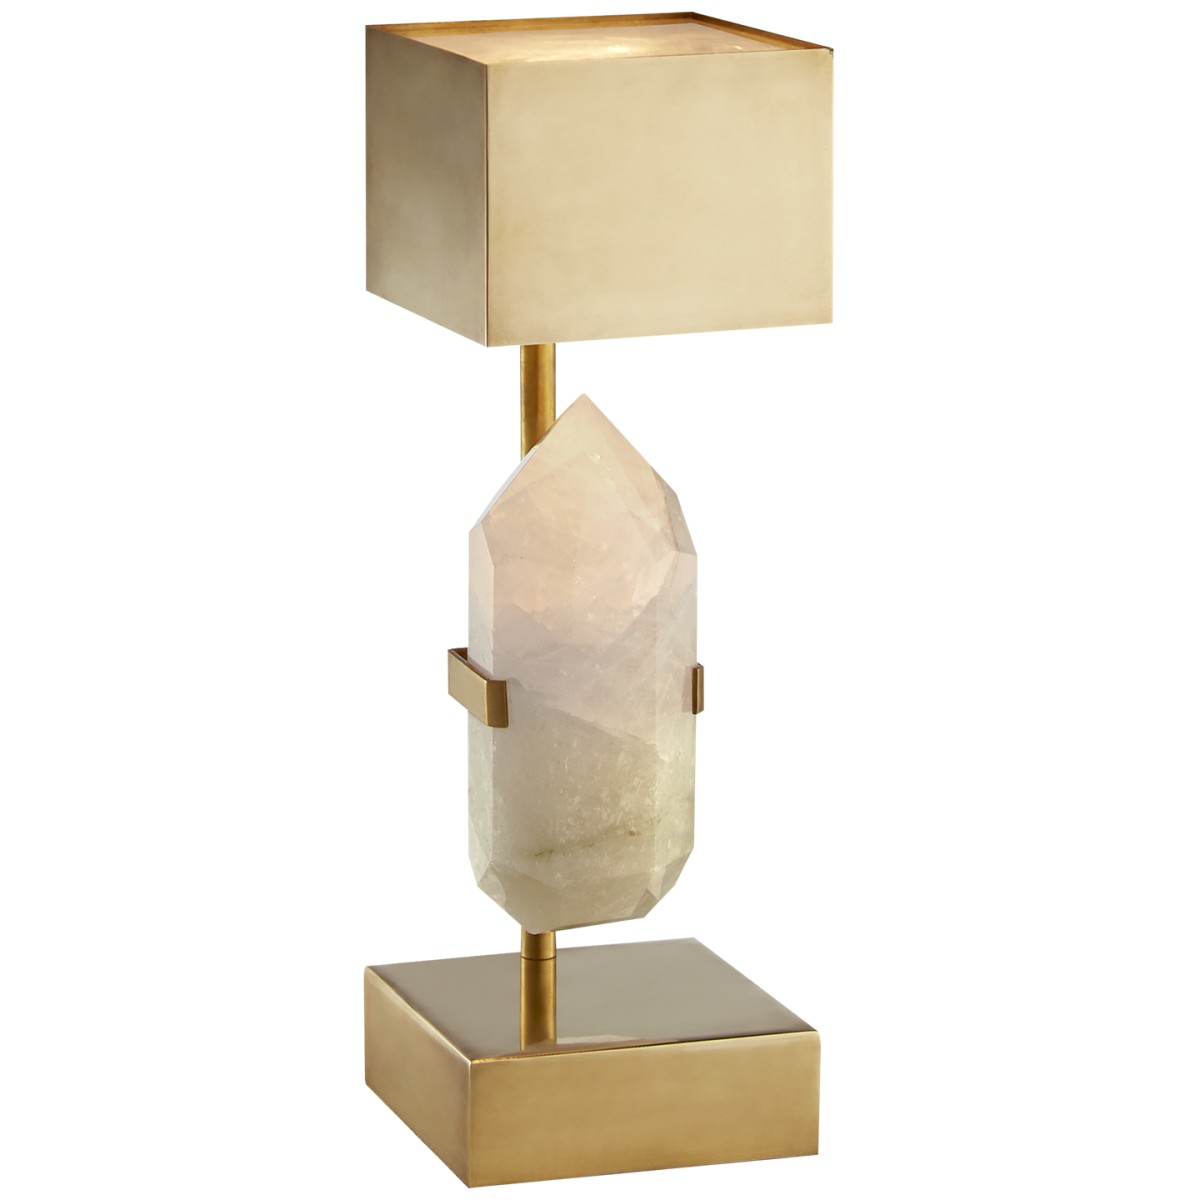 Halcyon Desk Lamp with Brass Shade